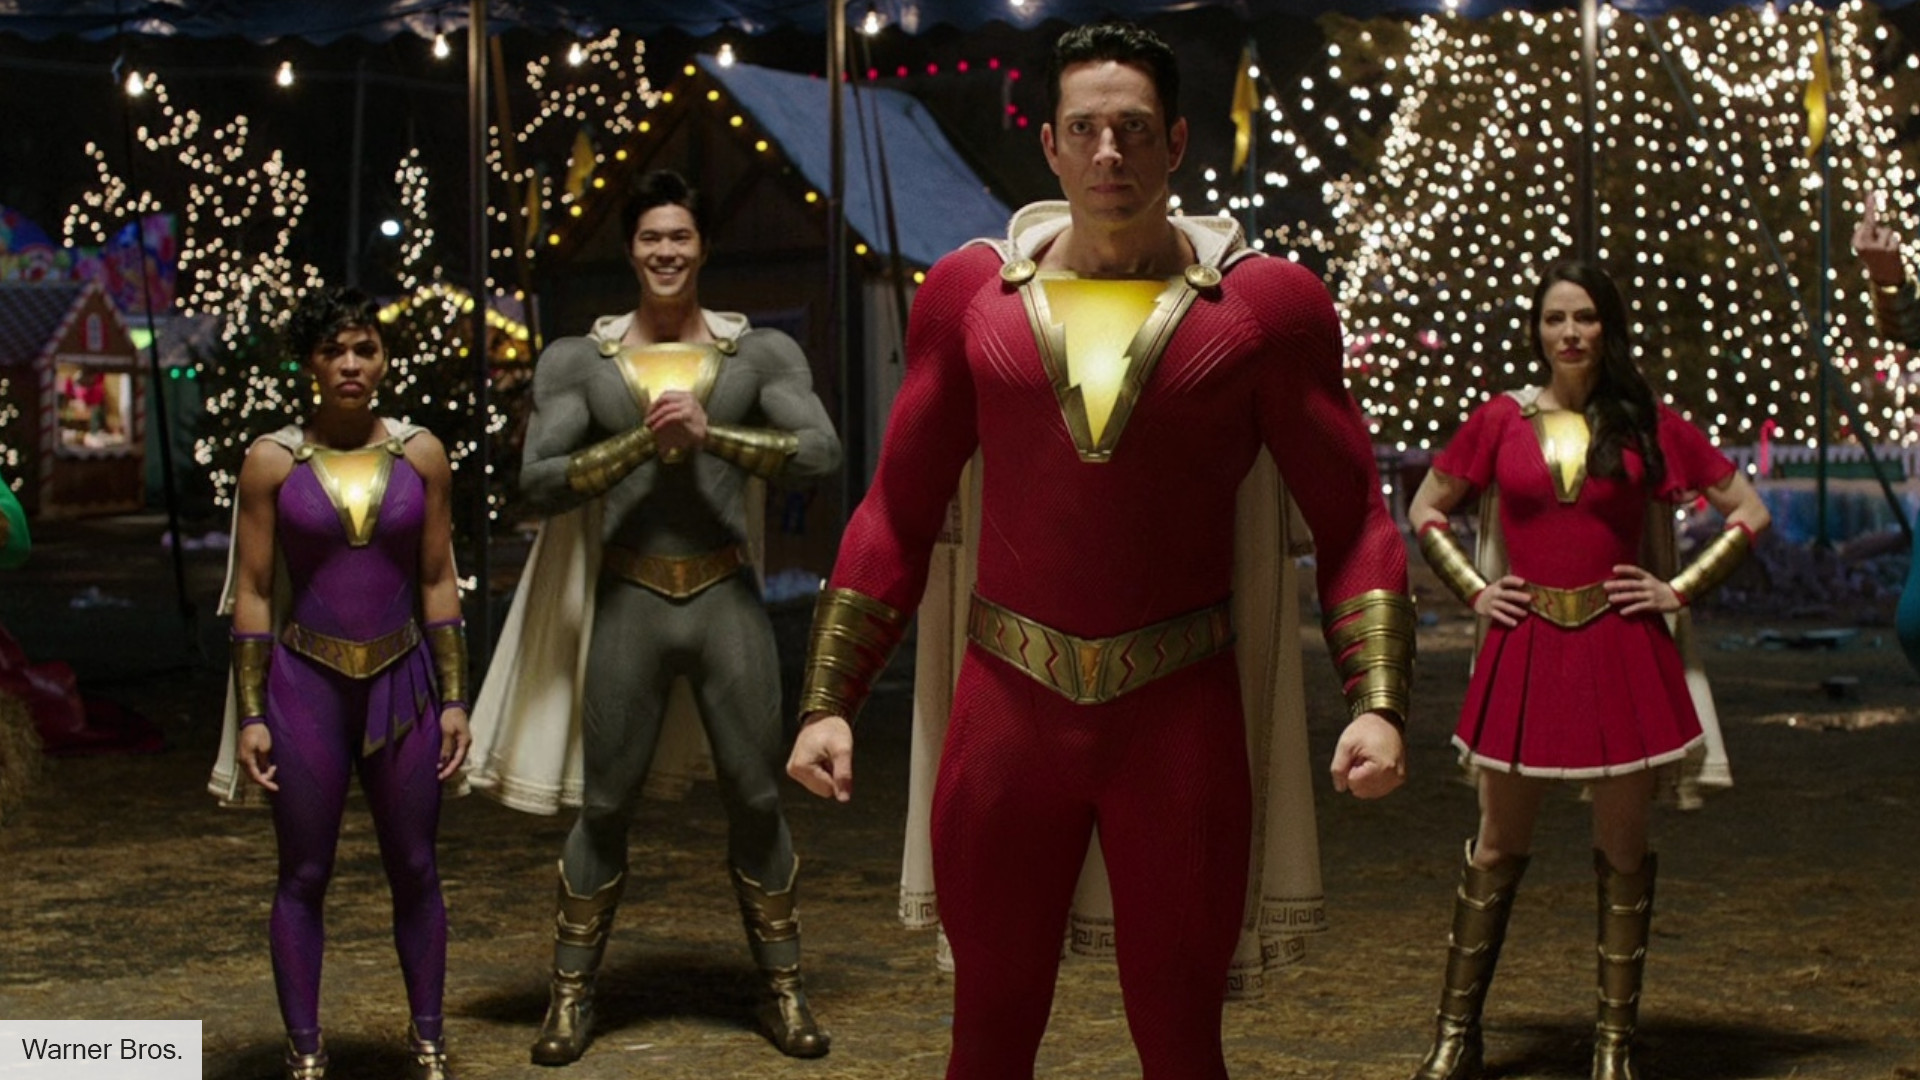 Shazam 2 director shares first official look at new costumes. The Digital Fix